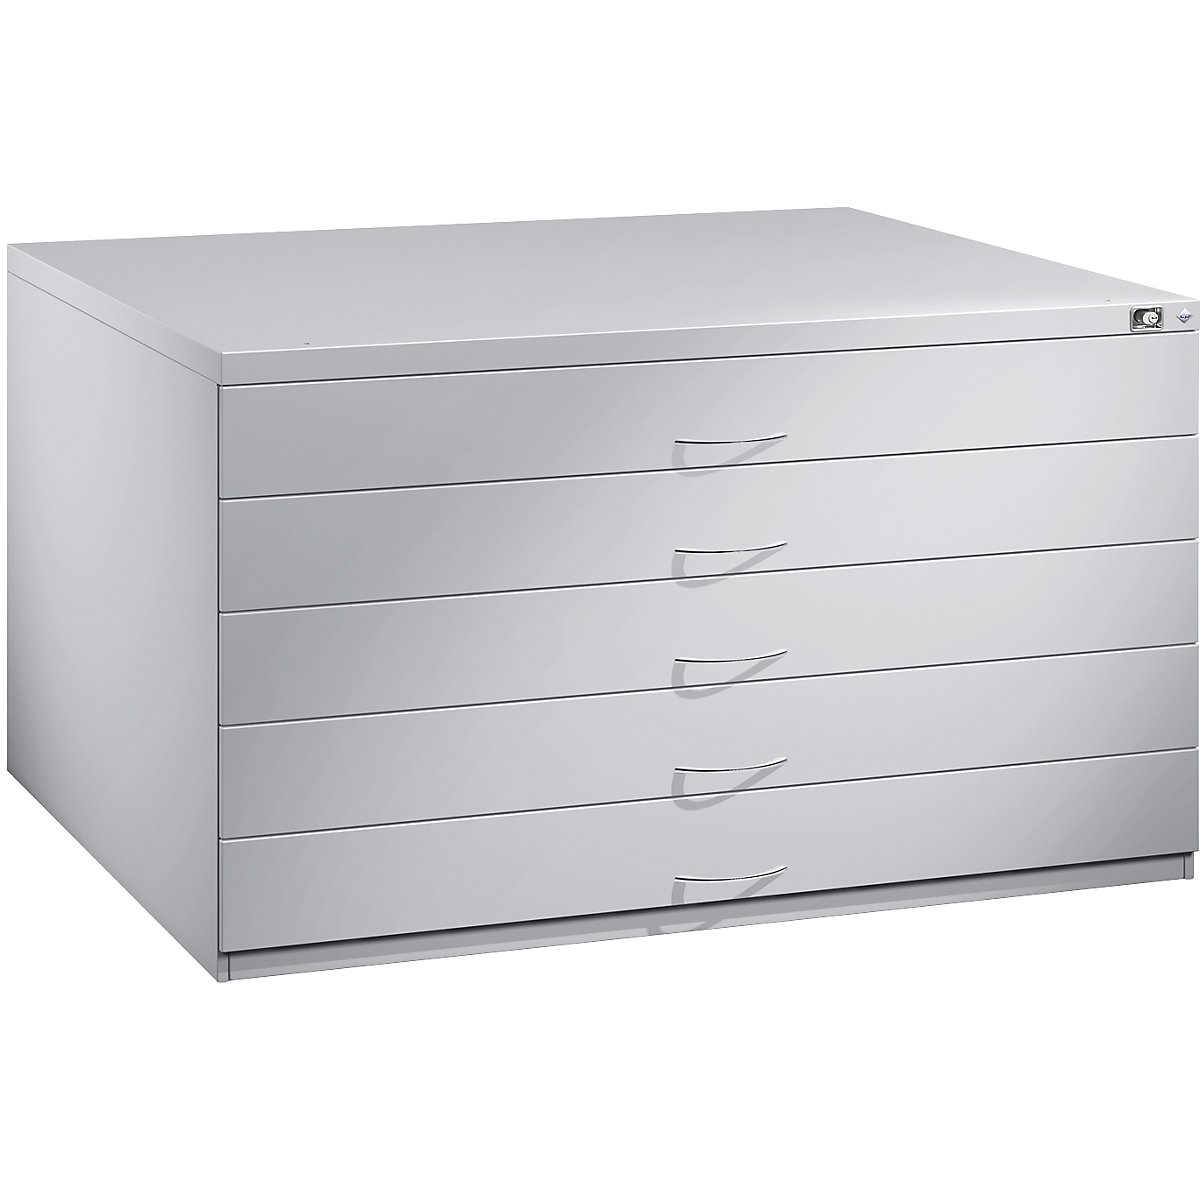 Drawing cabinet – C+P, A0, 5 drawers, height 760 mm, light grey-11